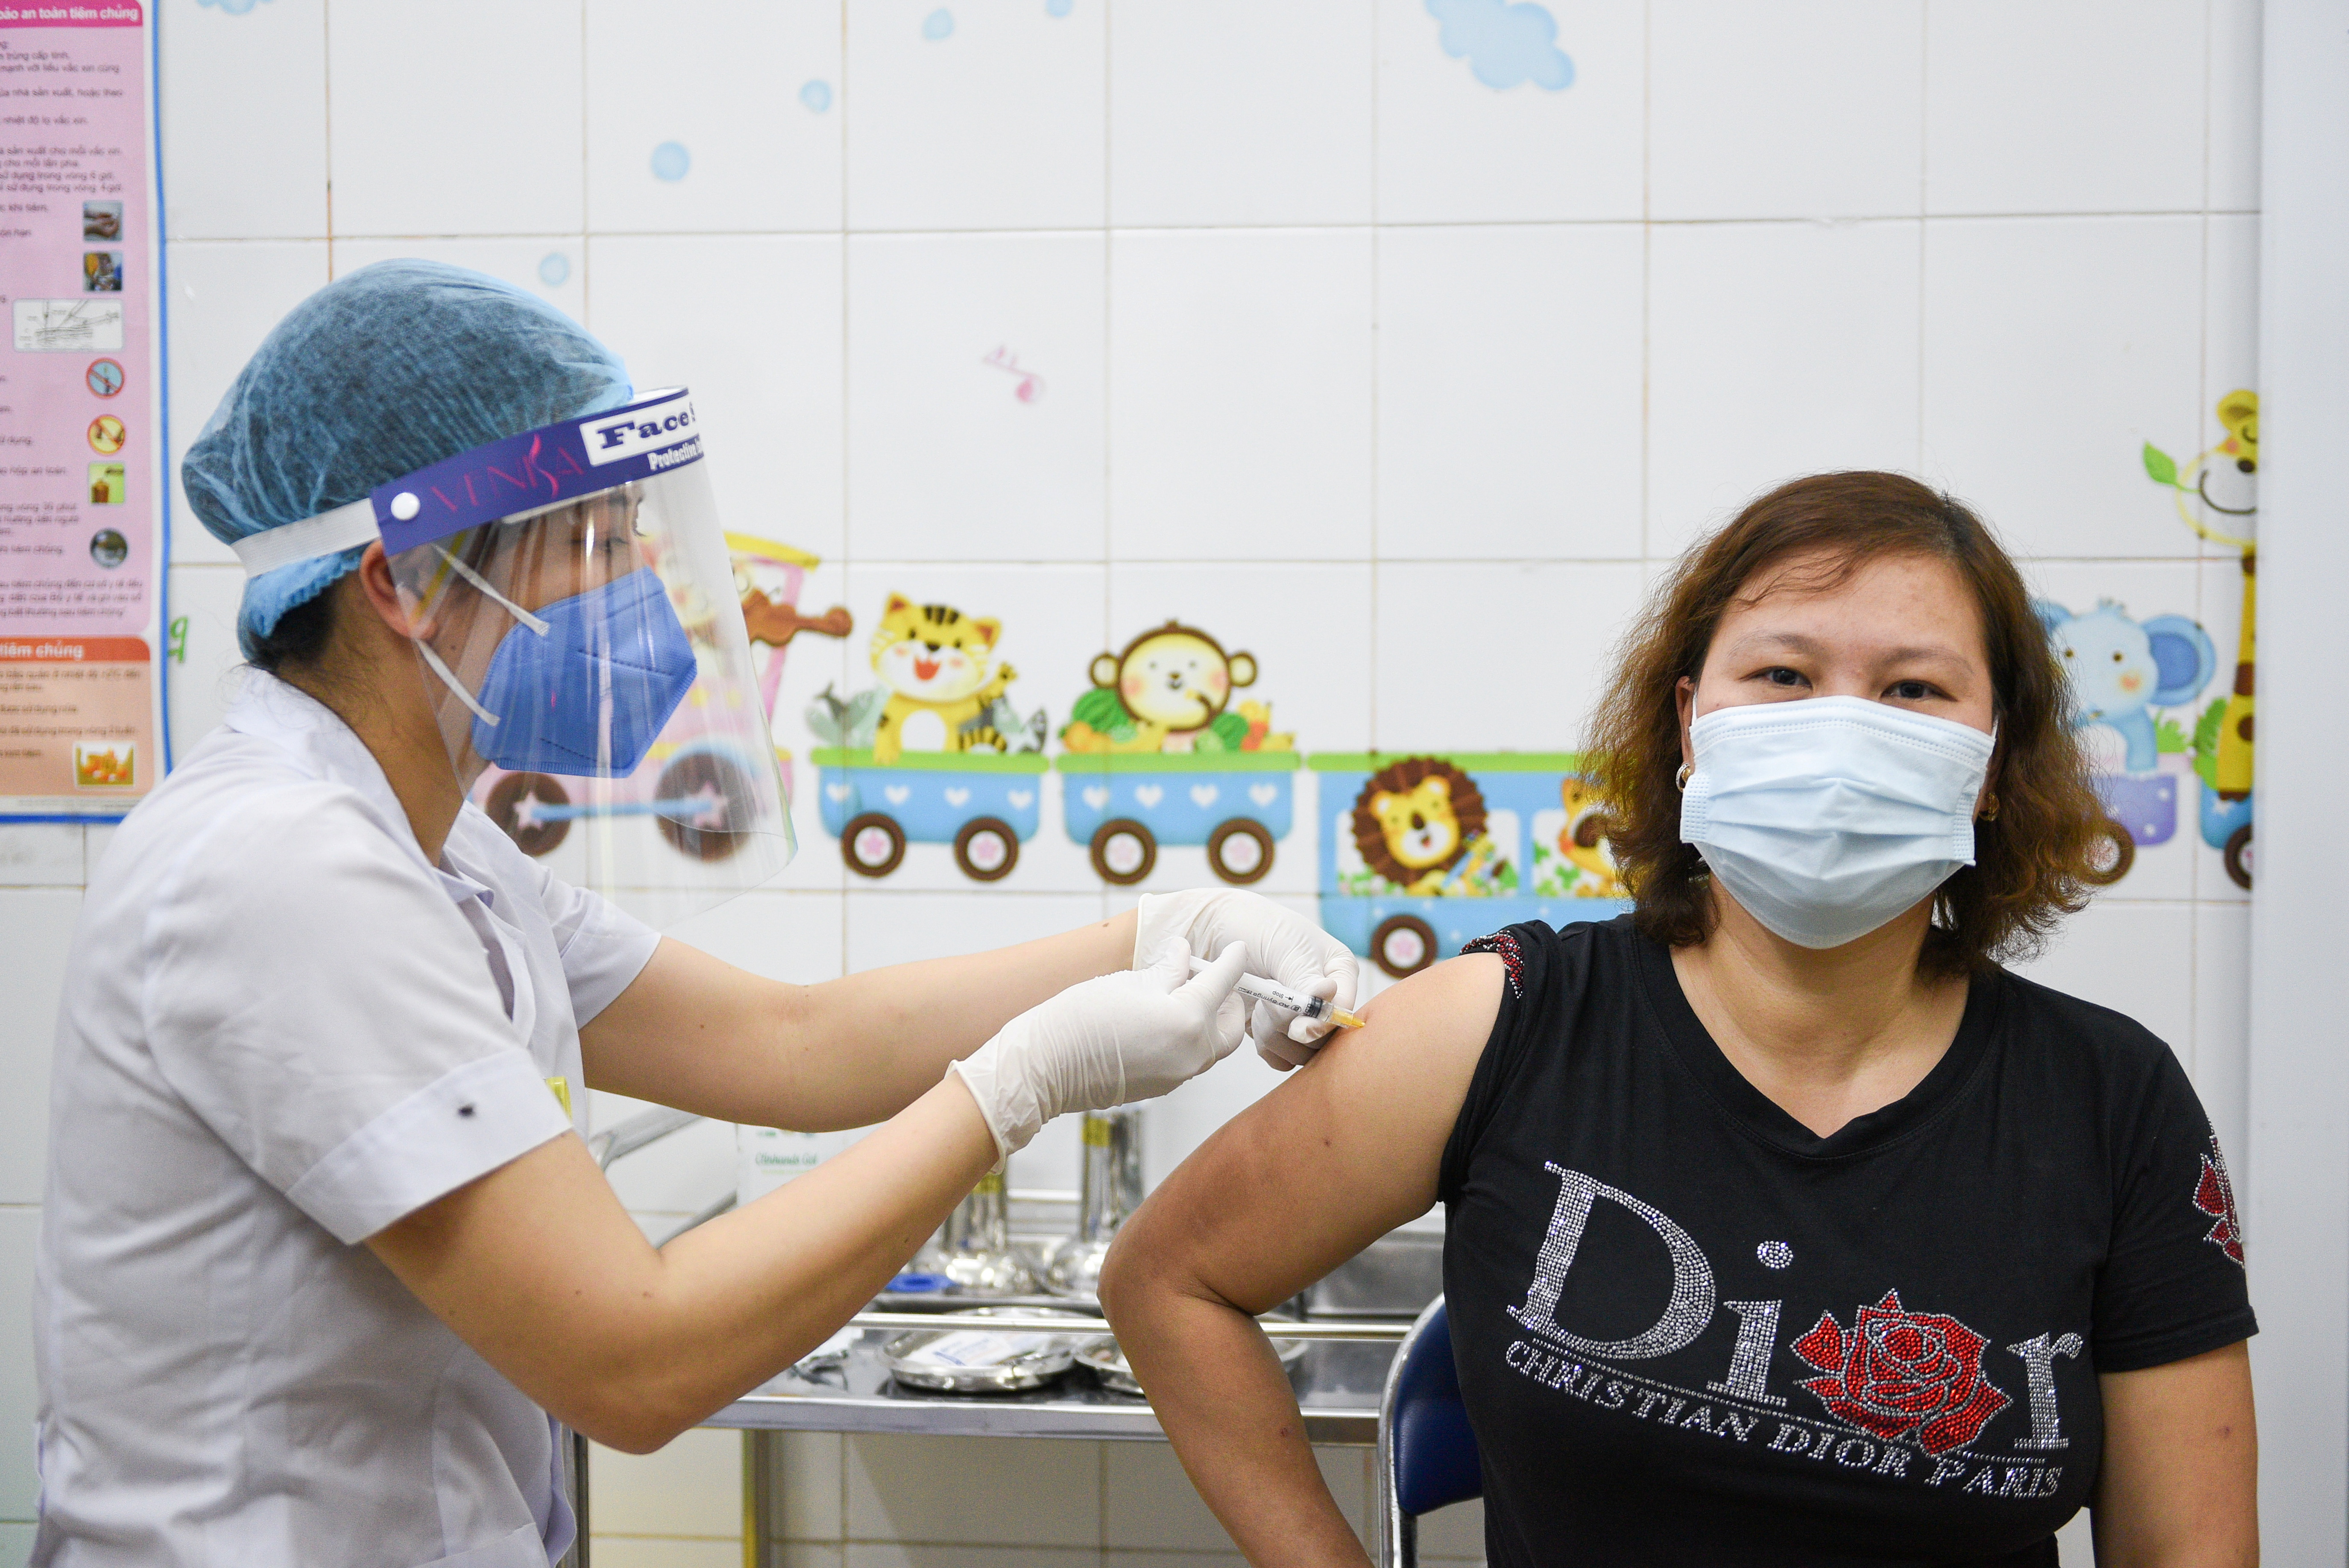 A woman receives a vaccine as Vietnam starts its official rollout of AstraZeneca's COVID-19 vaccine, in Hai Duong